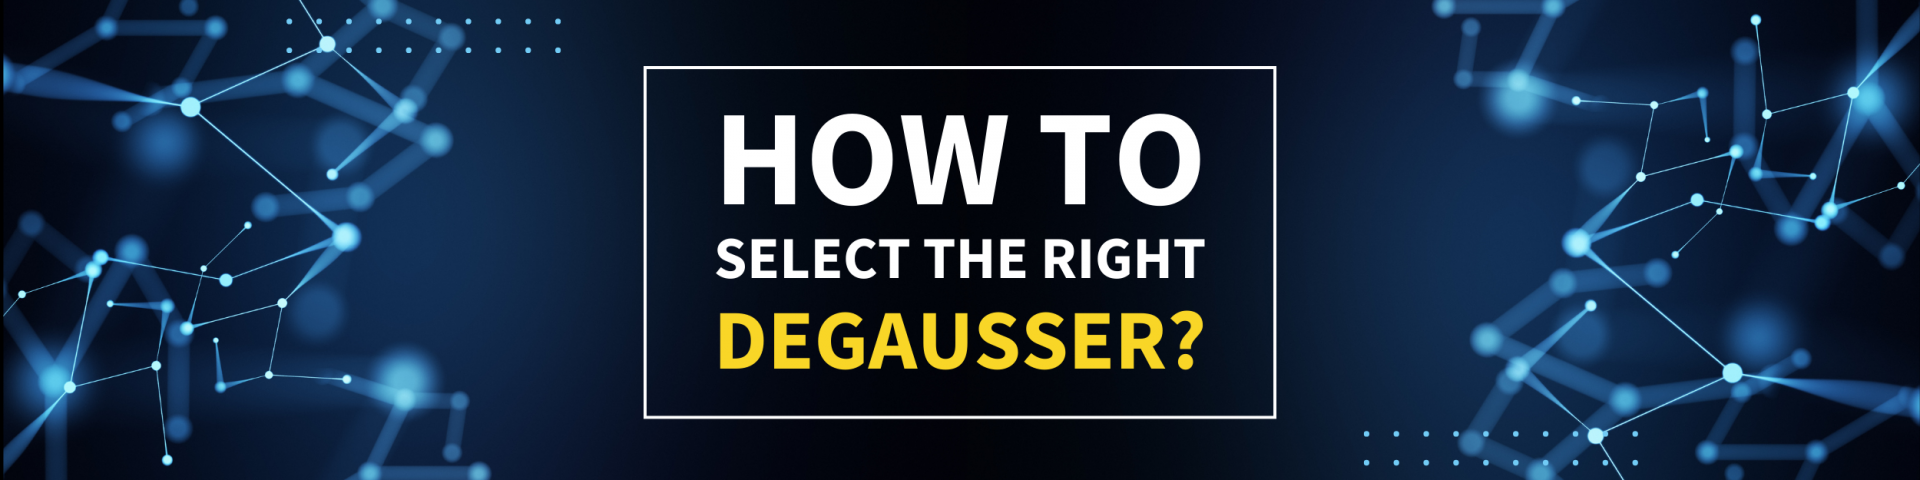 How-to-select-the-right-degausser-1920x480